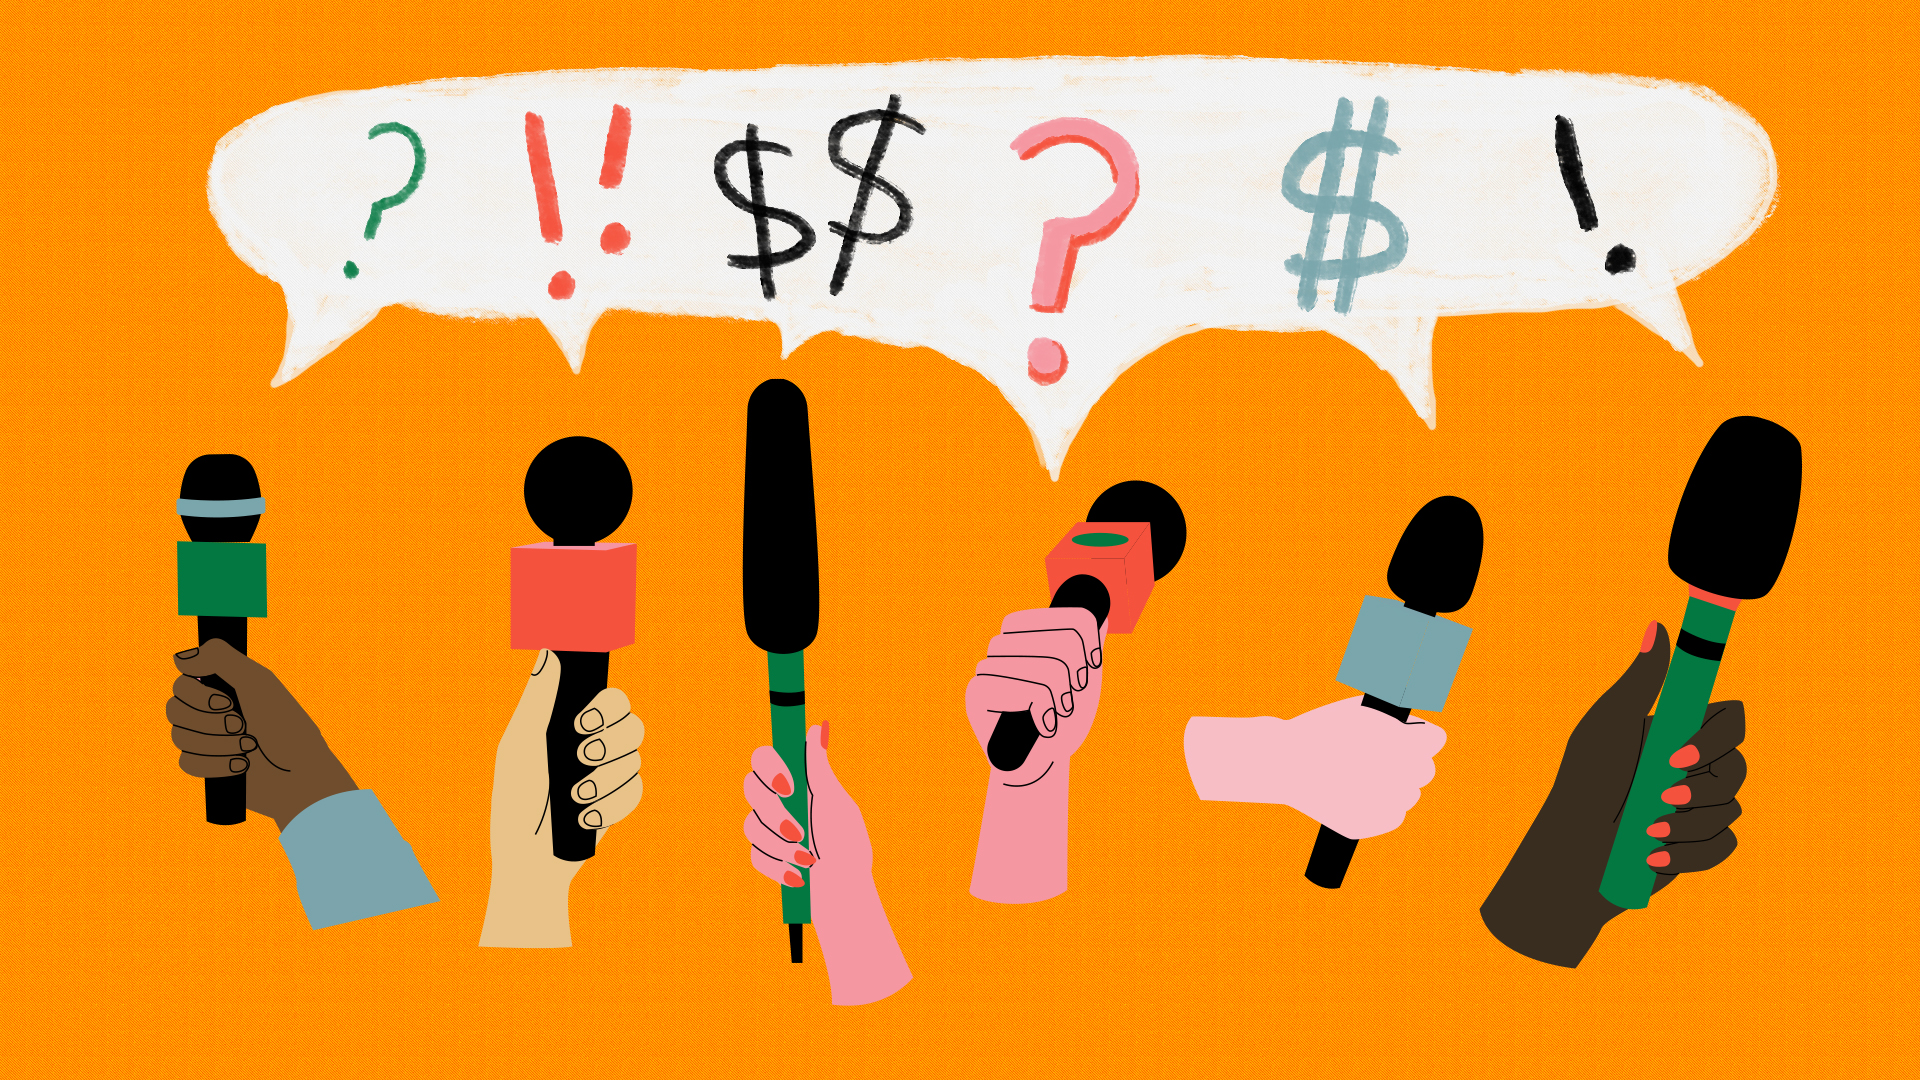 An illustration of a variety of hands holding microphones with question marks floating above them, on an orange background.